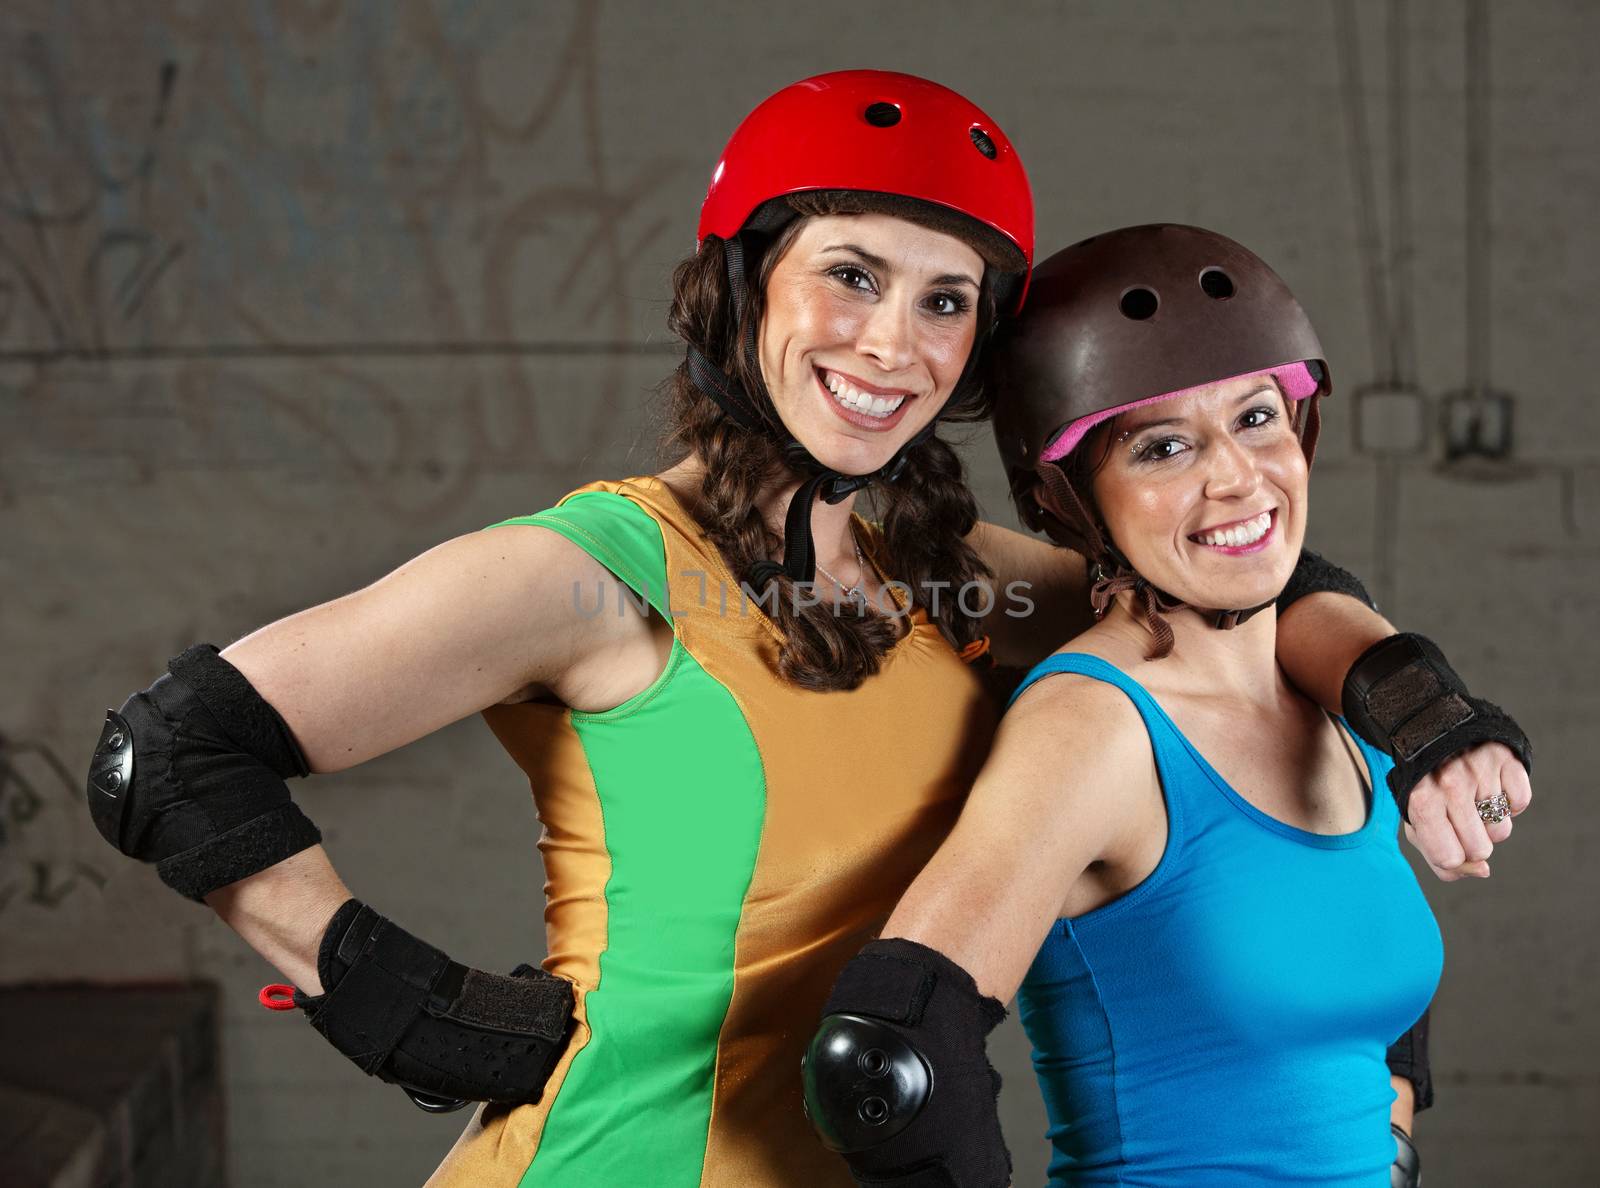 Pair of happy adult roller derby friends